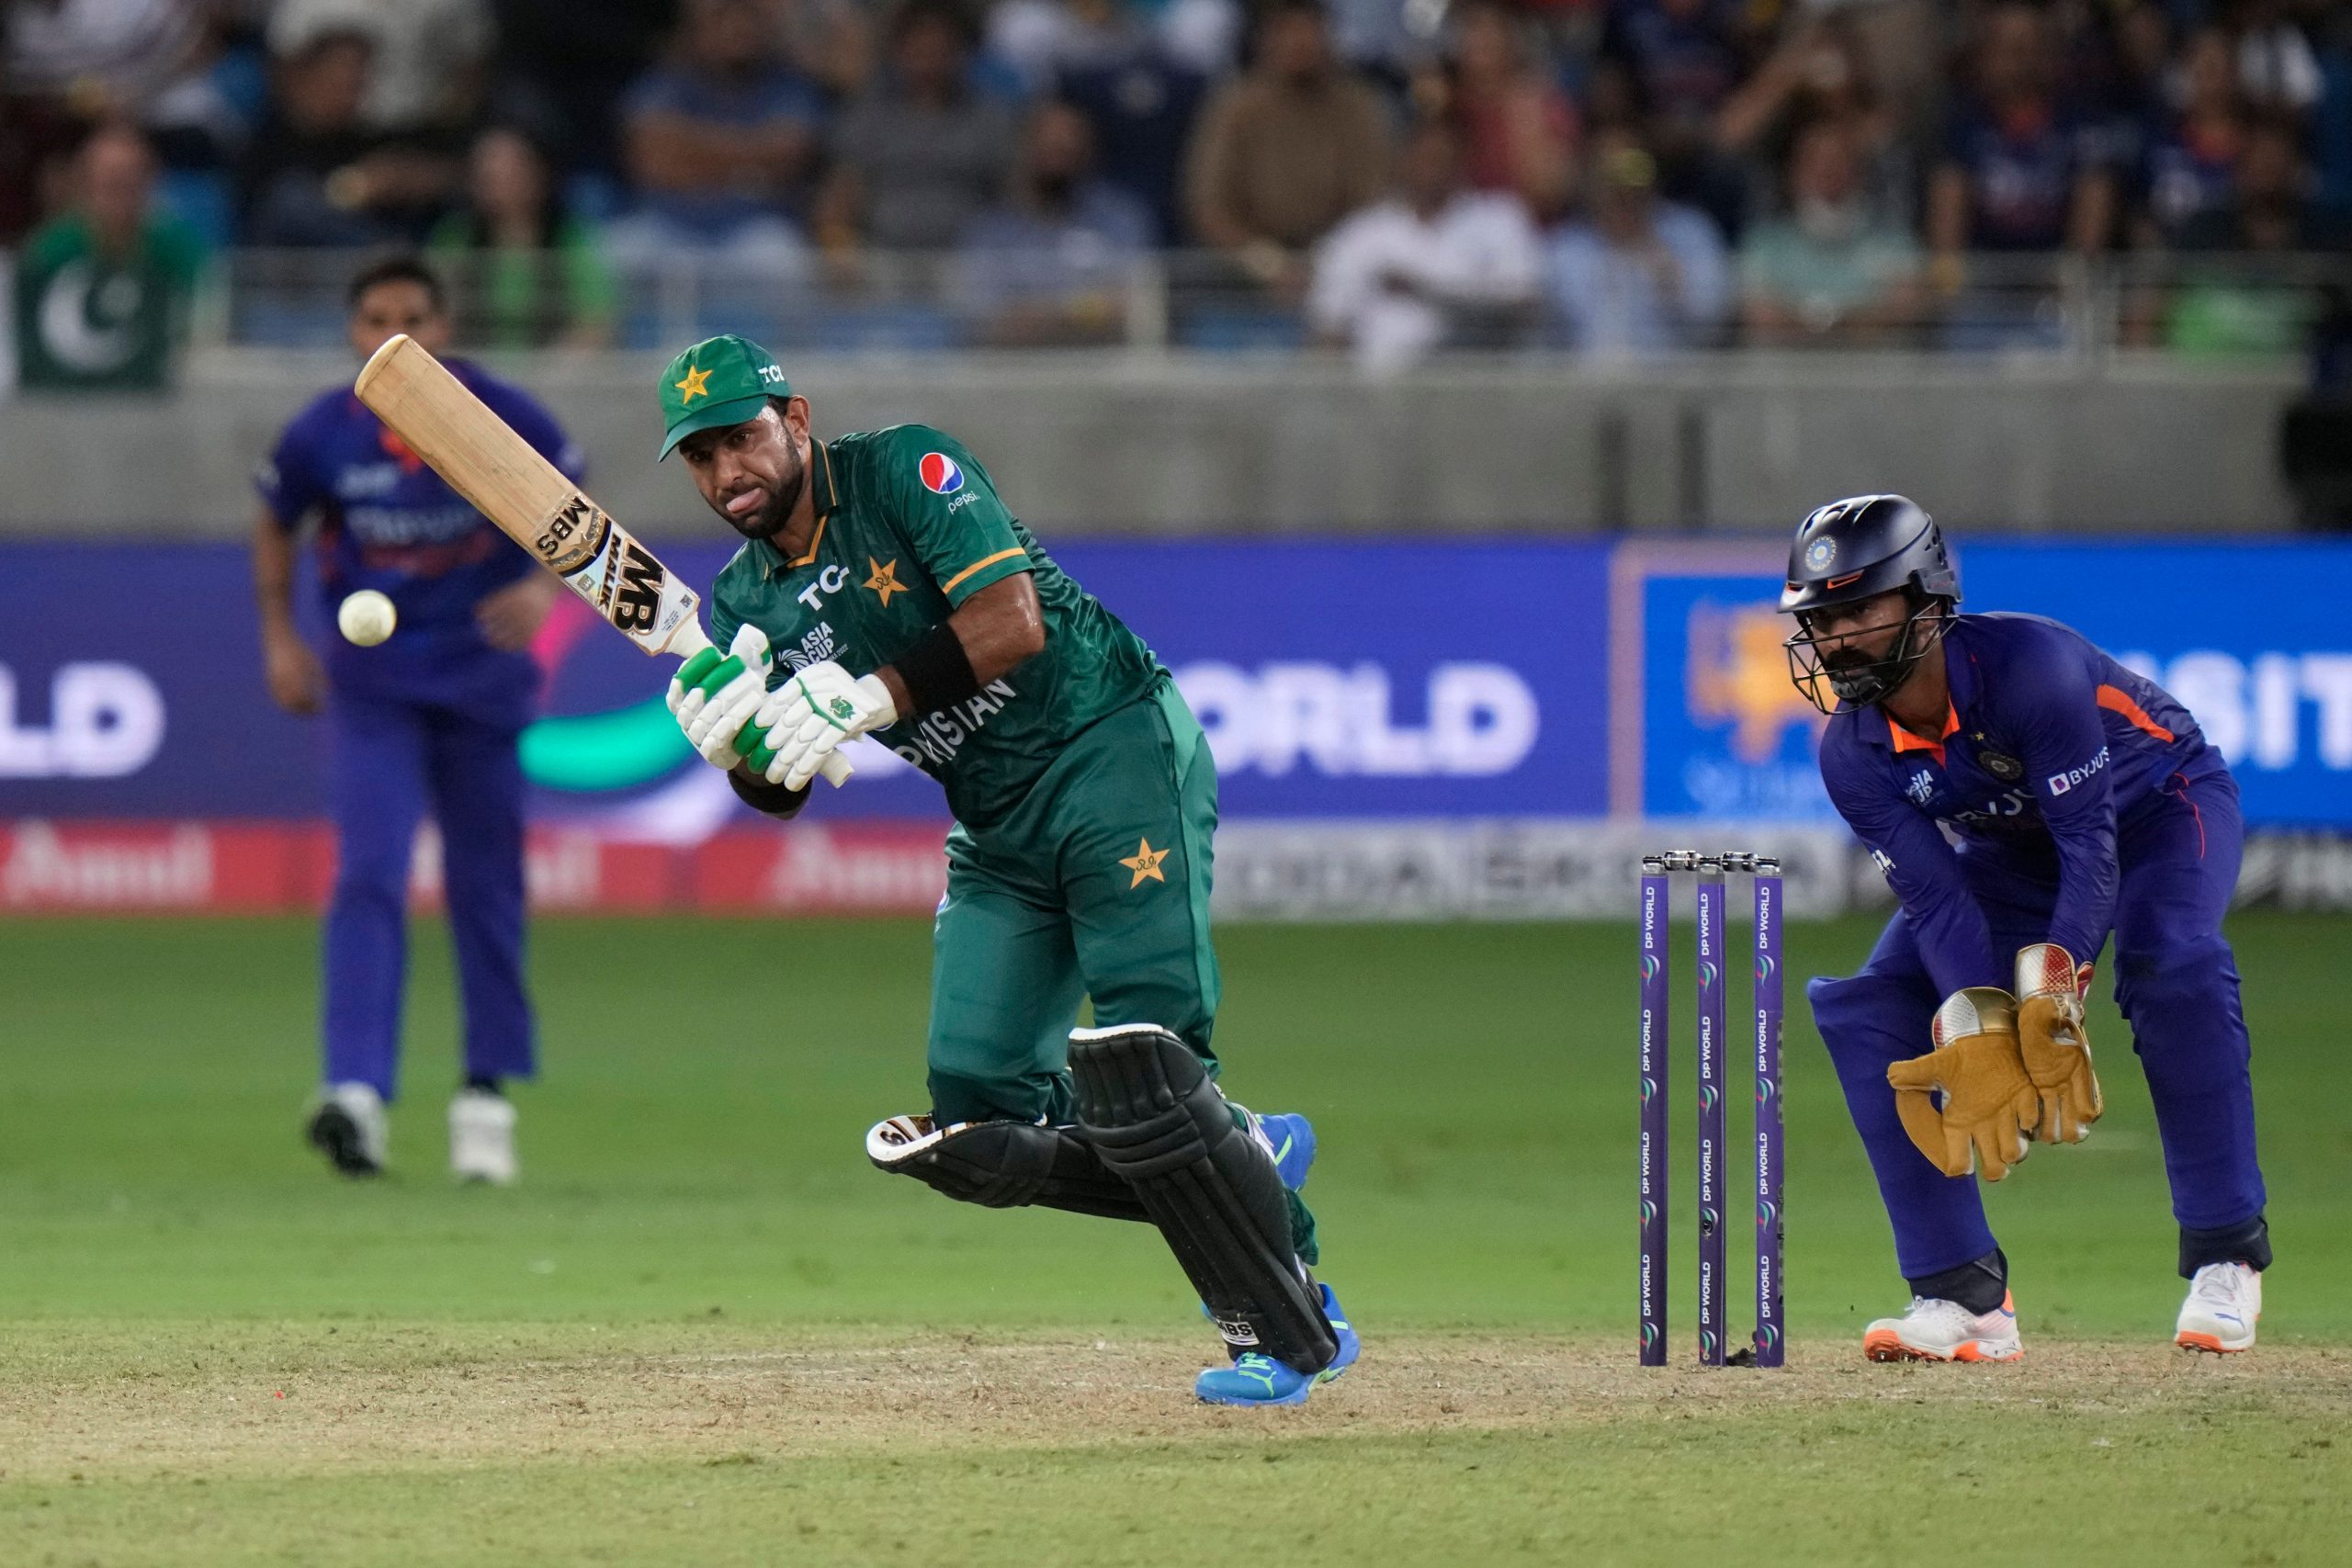 Asia Cup 2022: 5 reasons why Pakistan lost to India in game 1